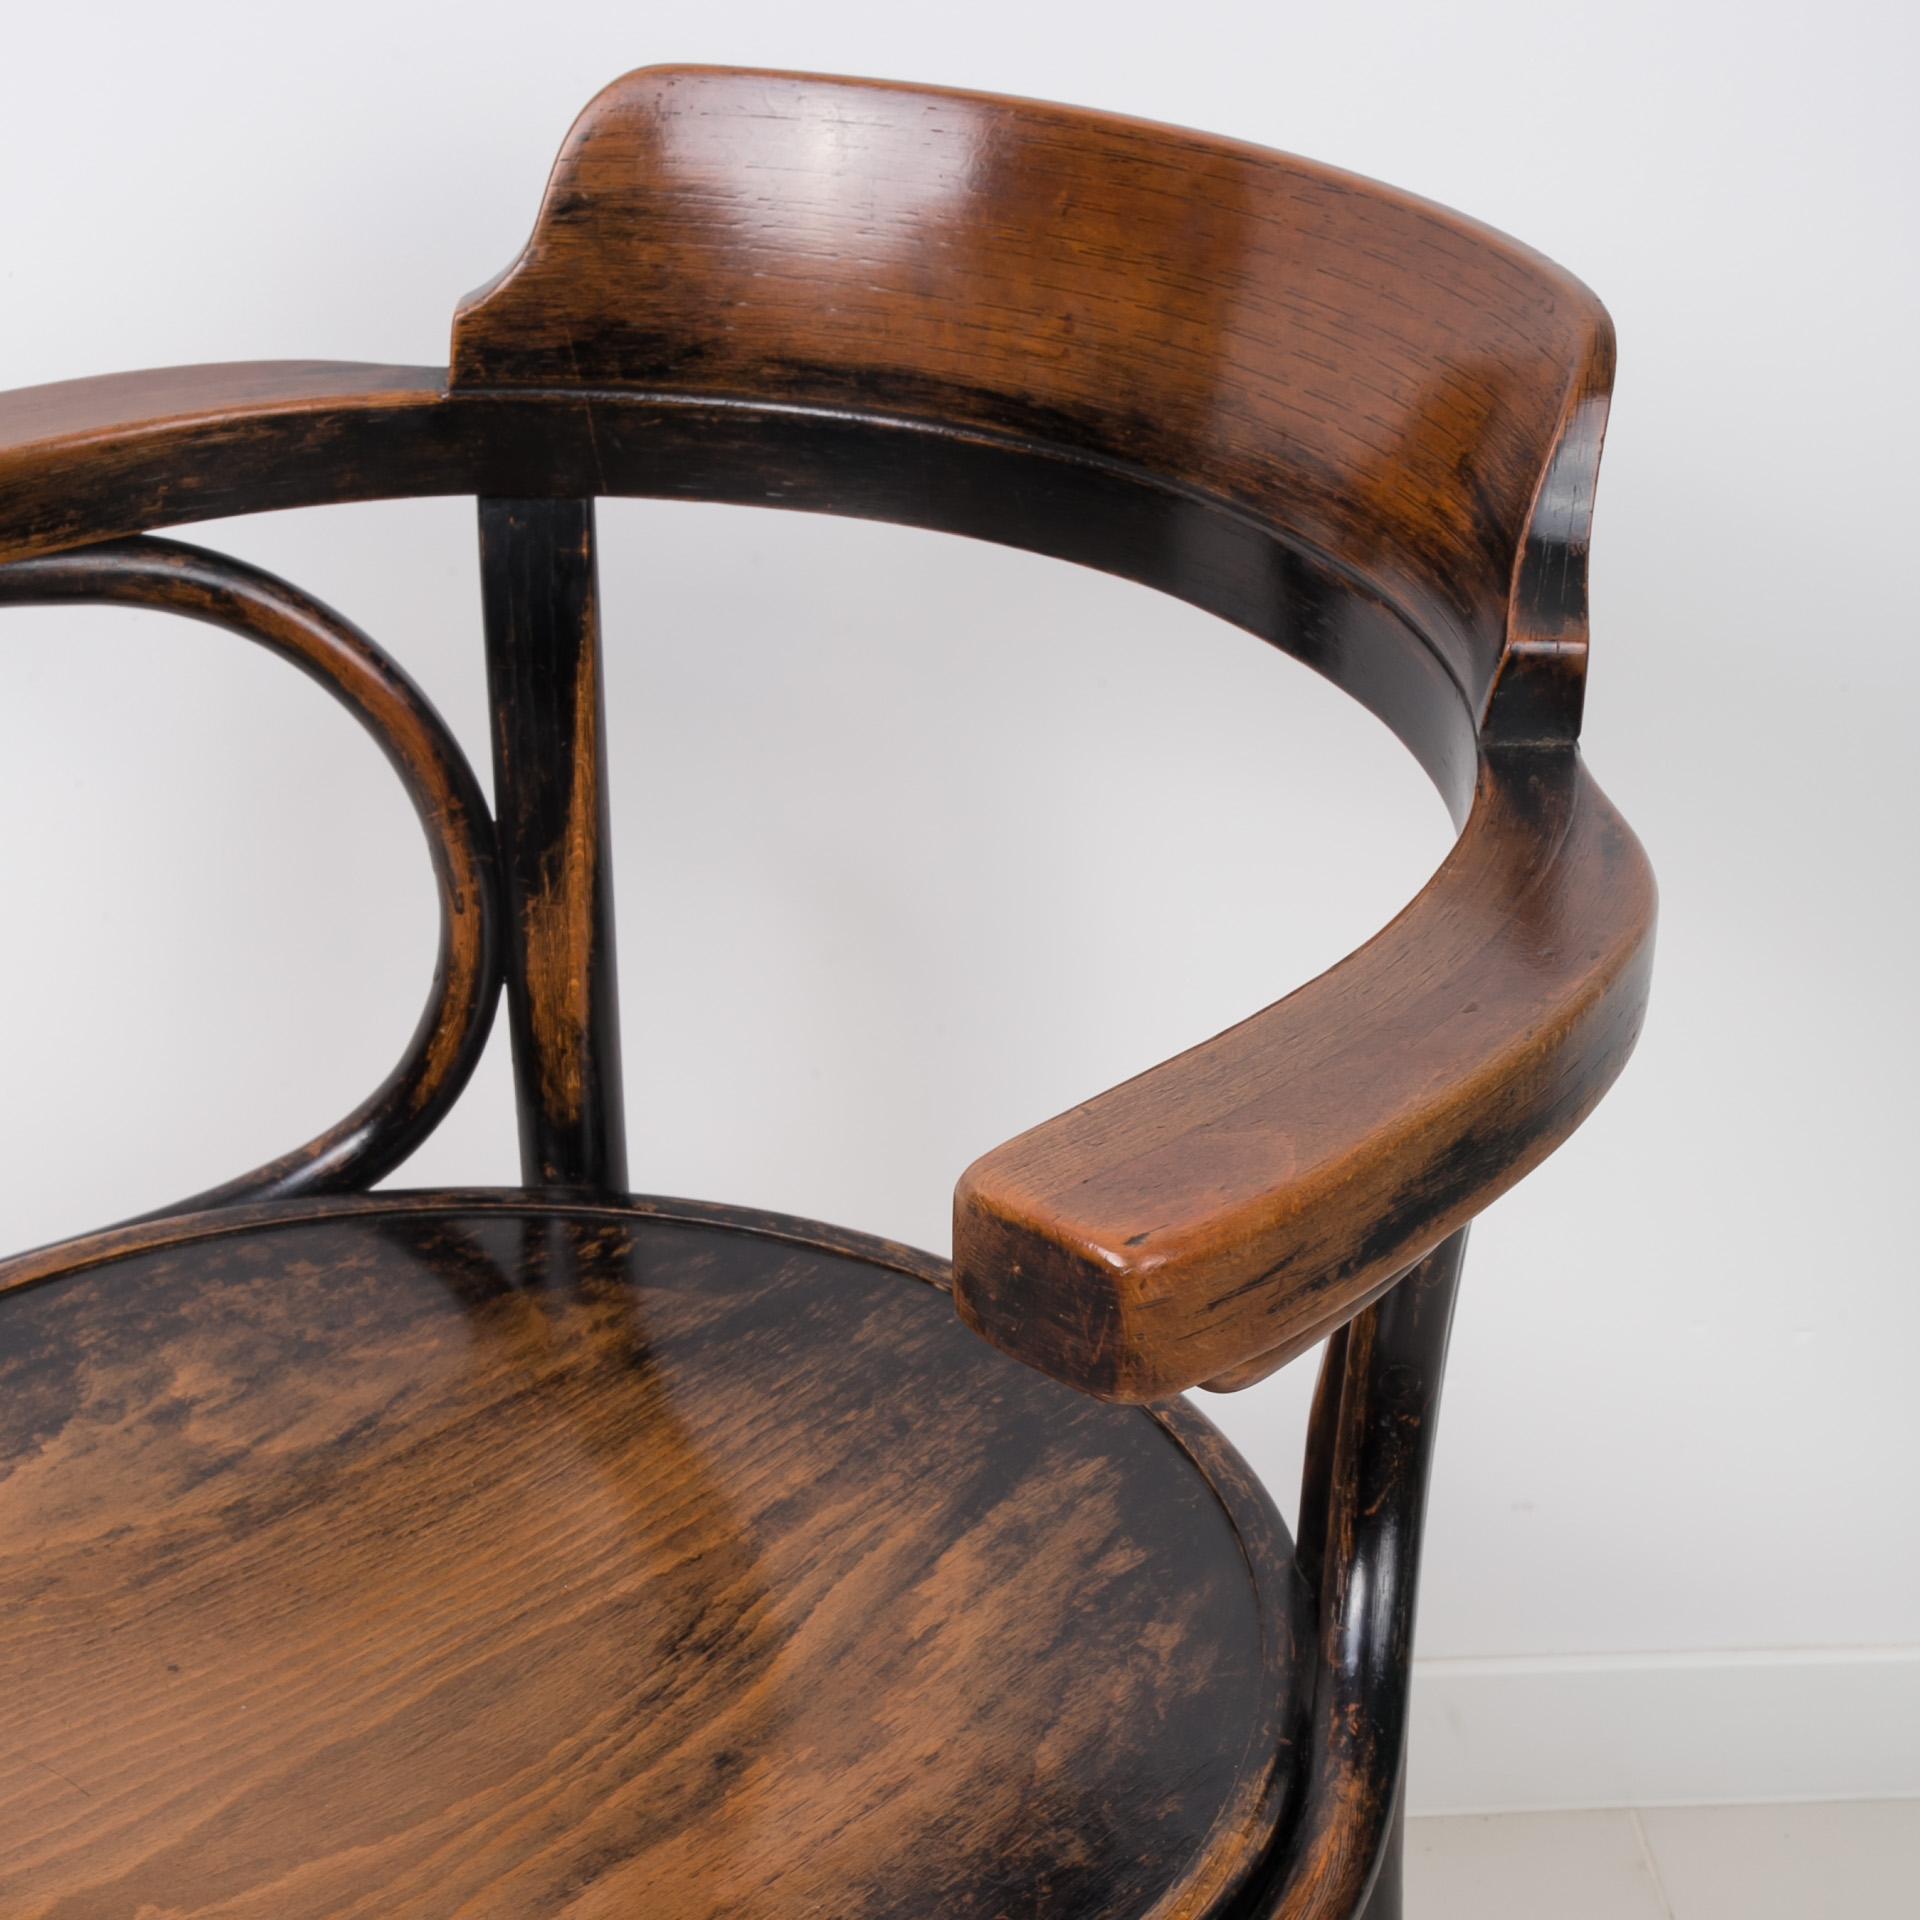 Iconic Thonet Chair Designed by M. Thonet, Bentwood, 1920s 2